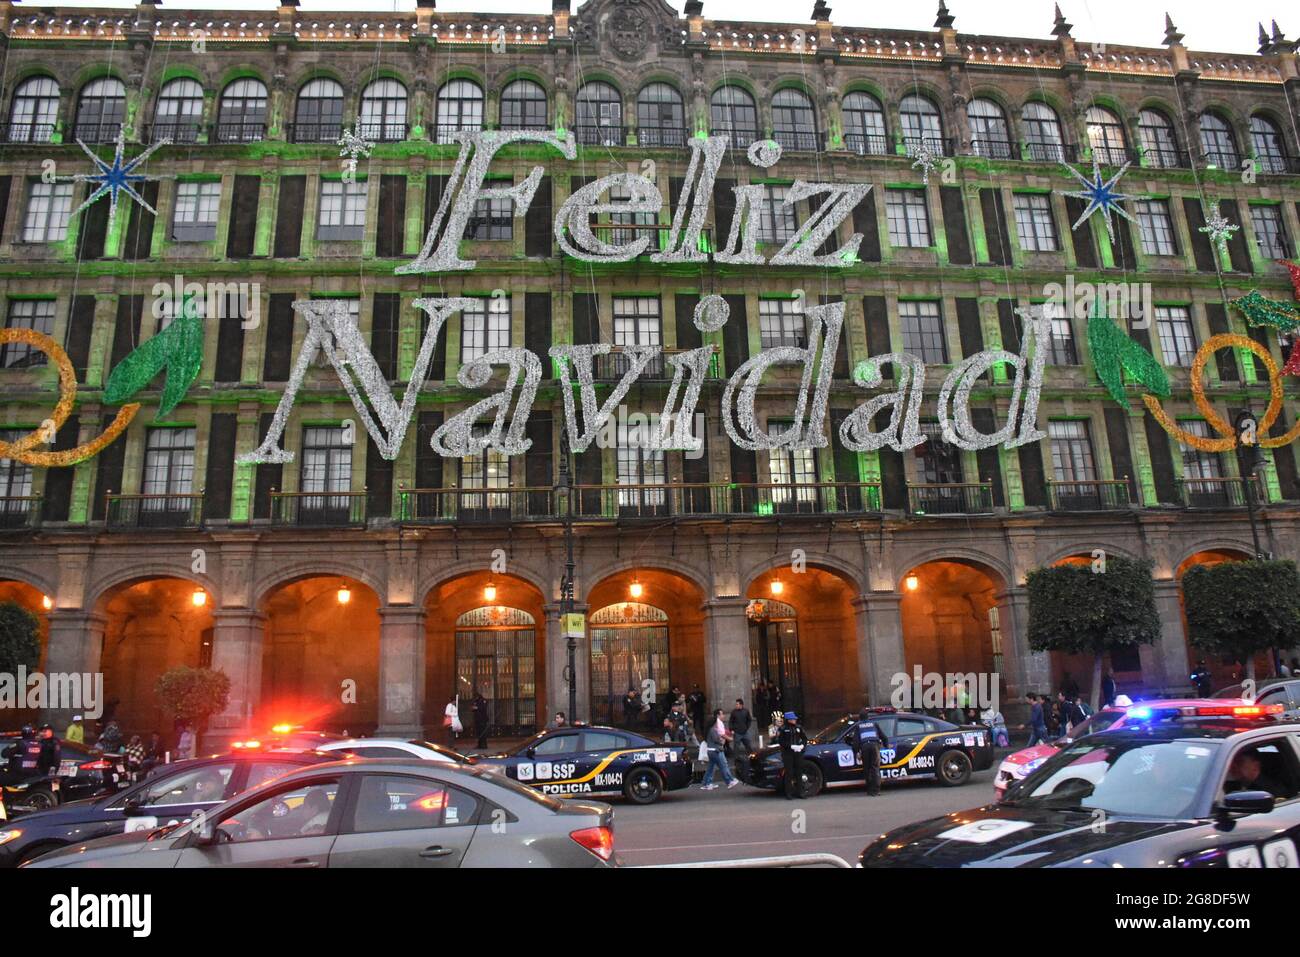 During Christmas, buildings surrounding the zocalo in Mexico City are lit with Christmas colors and greetings. 'Feliz Navidad' means Happy Christmas. Stock Photo